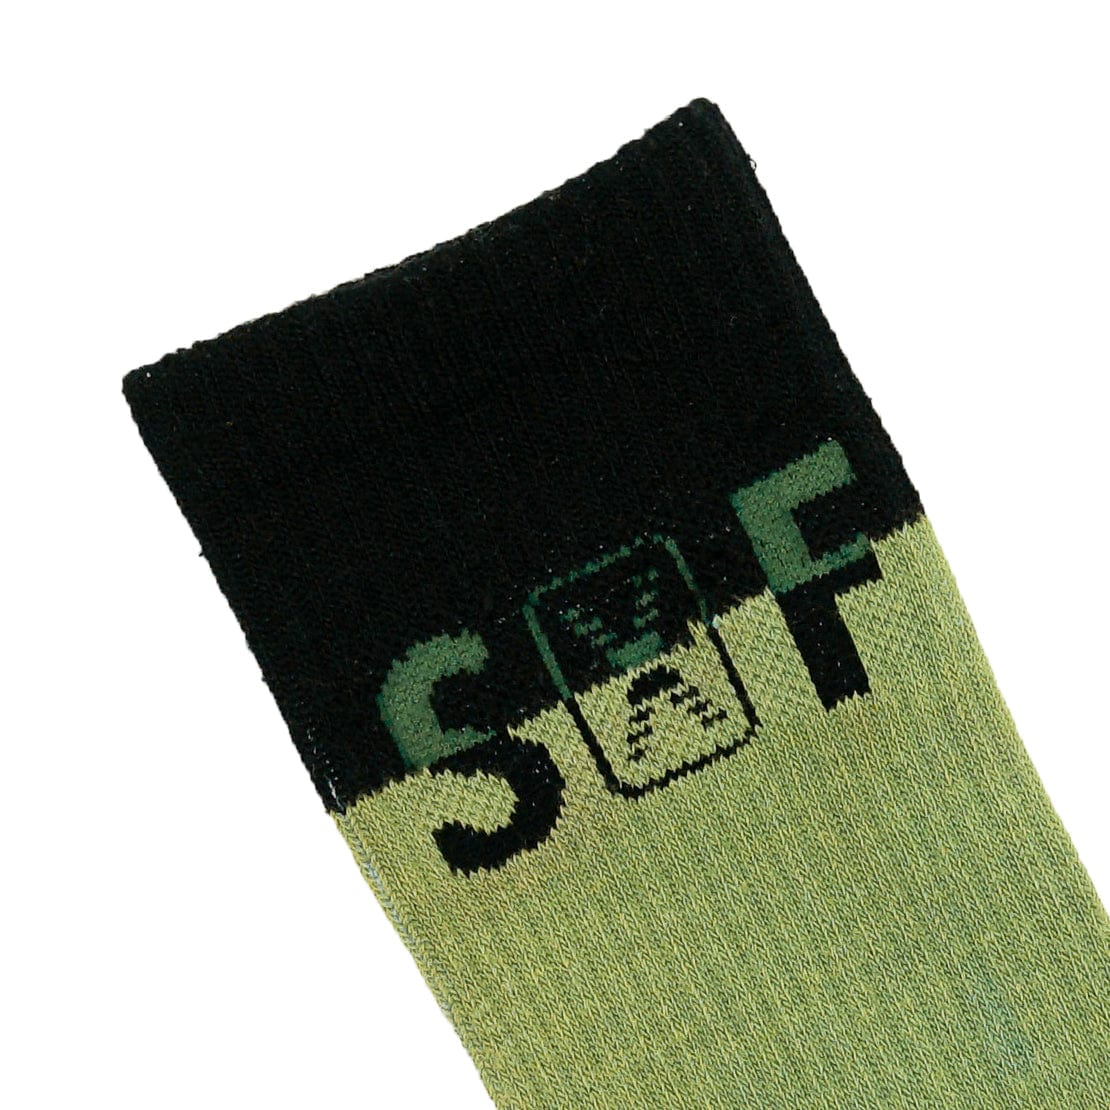 SOF Classic Crew Socks in olive and black